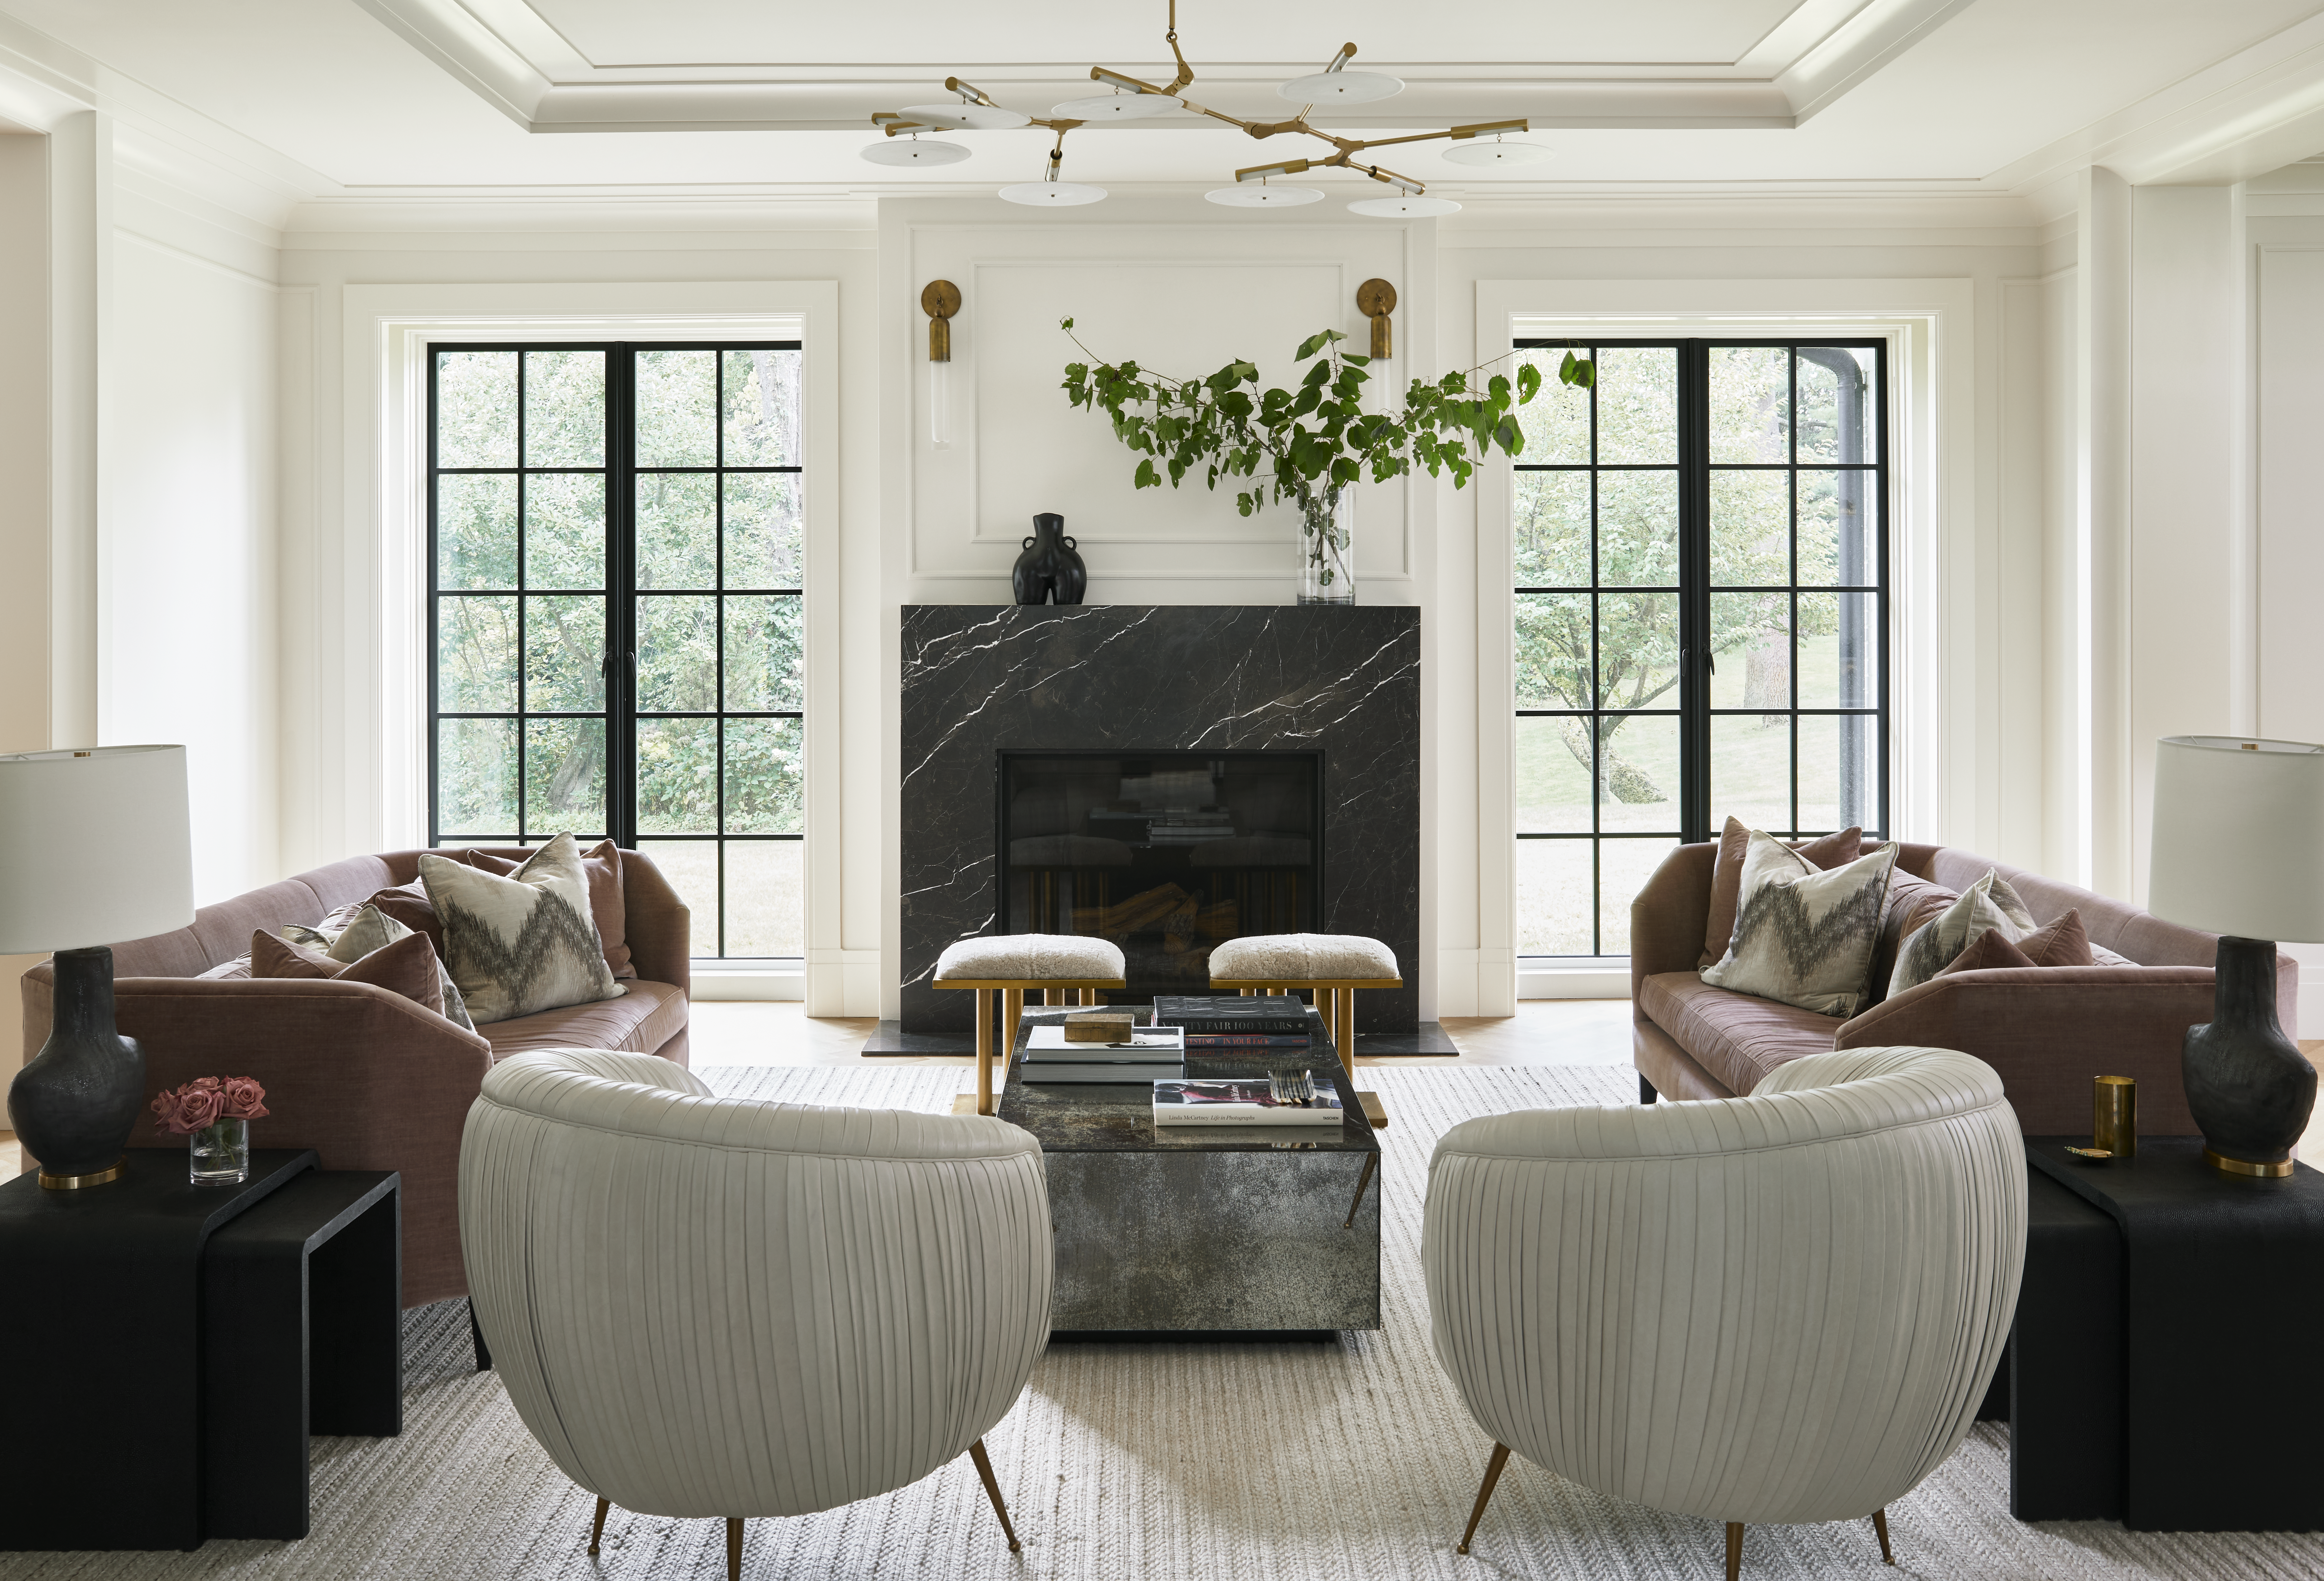 Designer Jenny Wolf added layers of glamour to this living room: ruched bucket chairs, luscious velvet sofas, the aged patina of the mirrored table, golden accents. But like the rest of the home, it’s surprisingly practical as well as luxurious. Photo by Read McKendree.  
